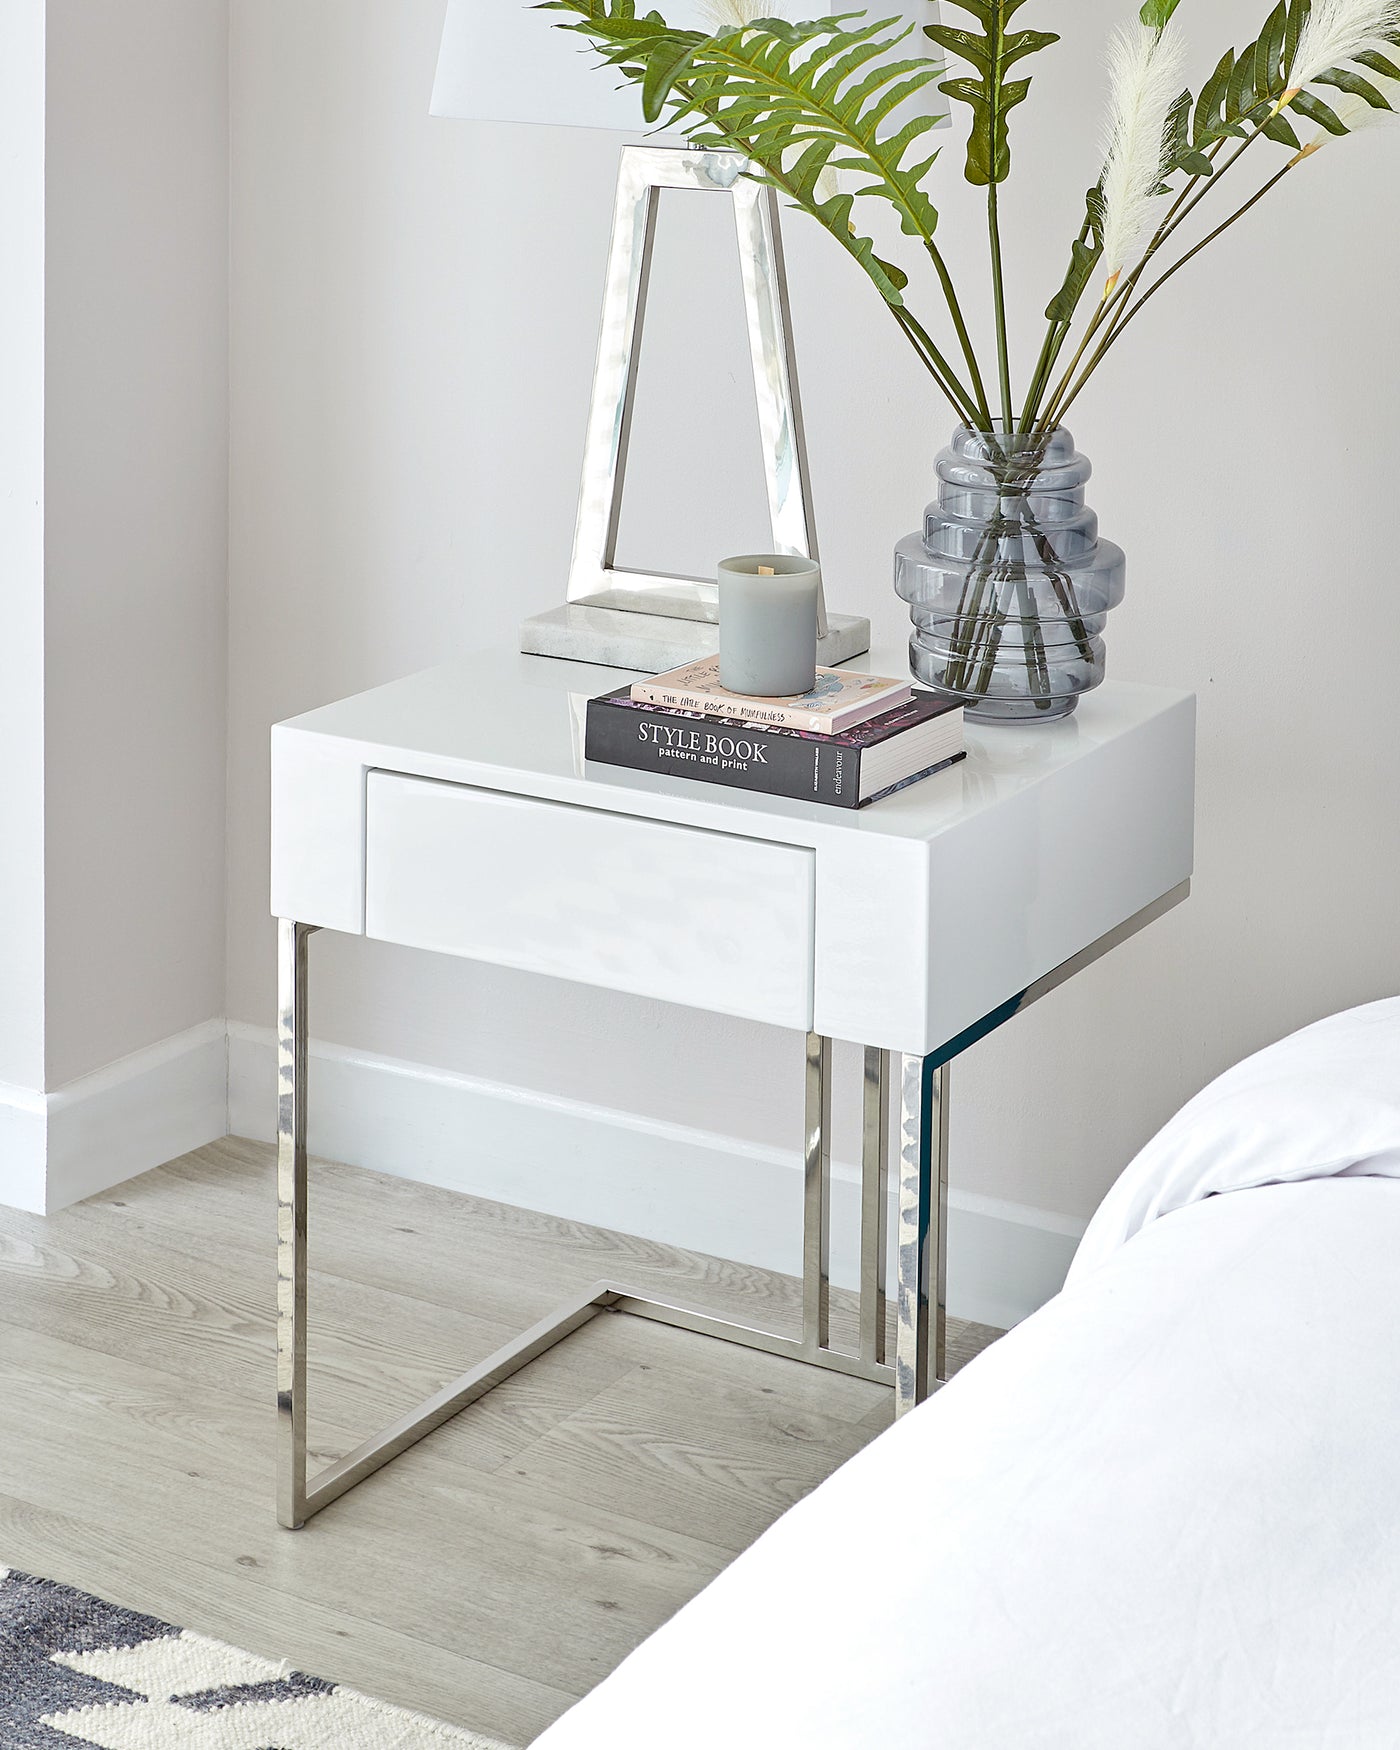 Modern minimalist white bedside table with a glossy finish and sleek silver metal legs, featuring a single drawer for storage.